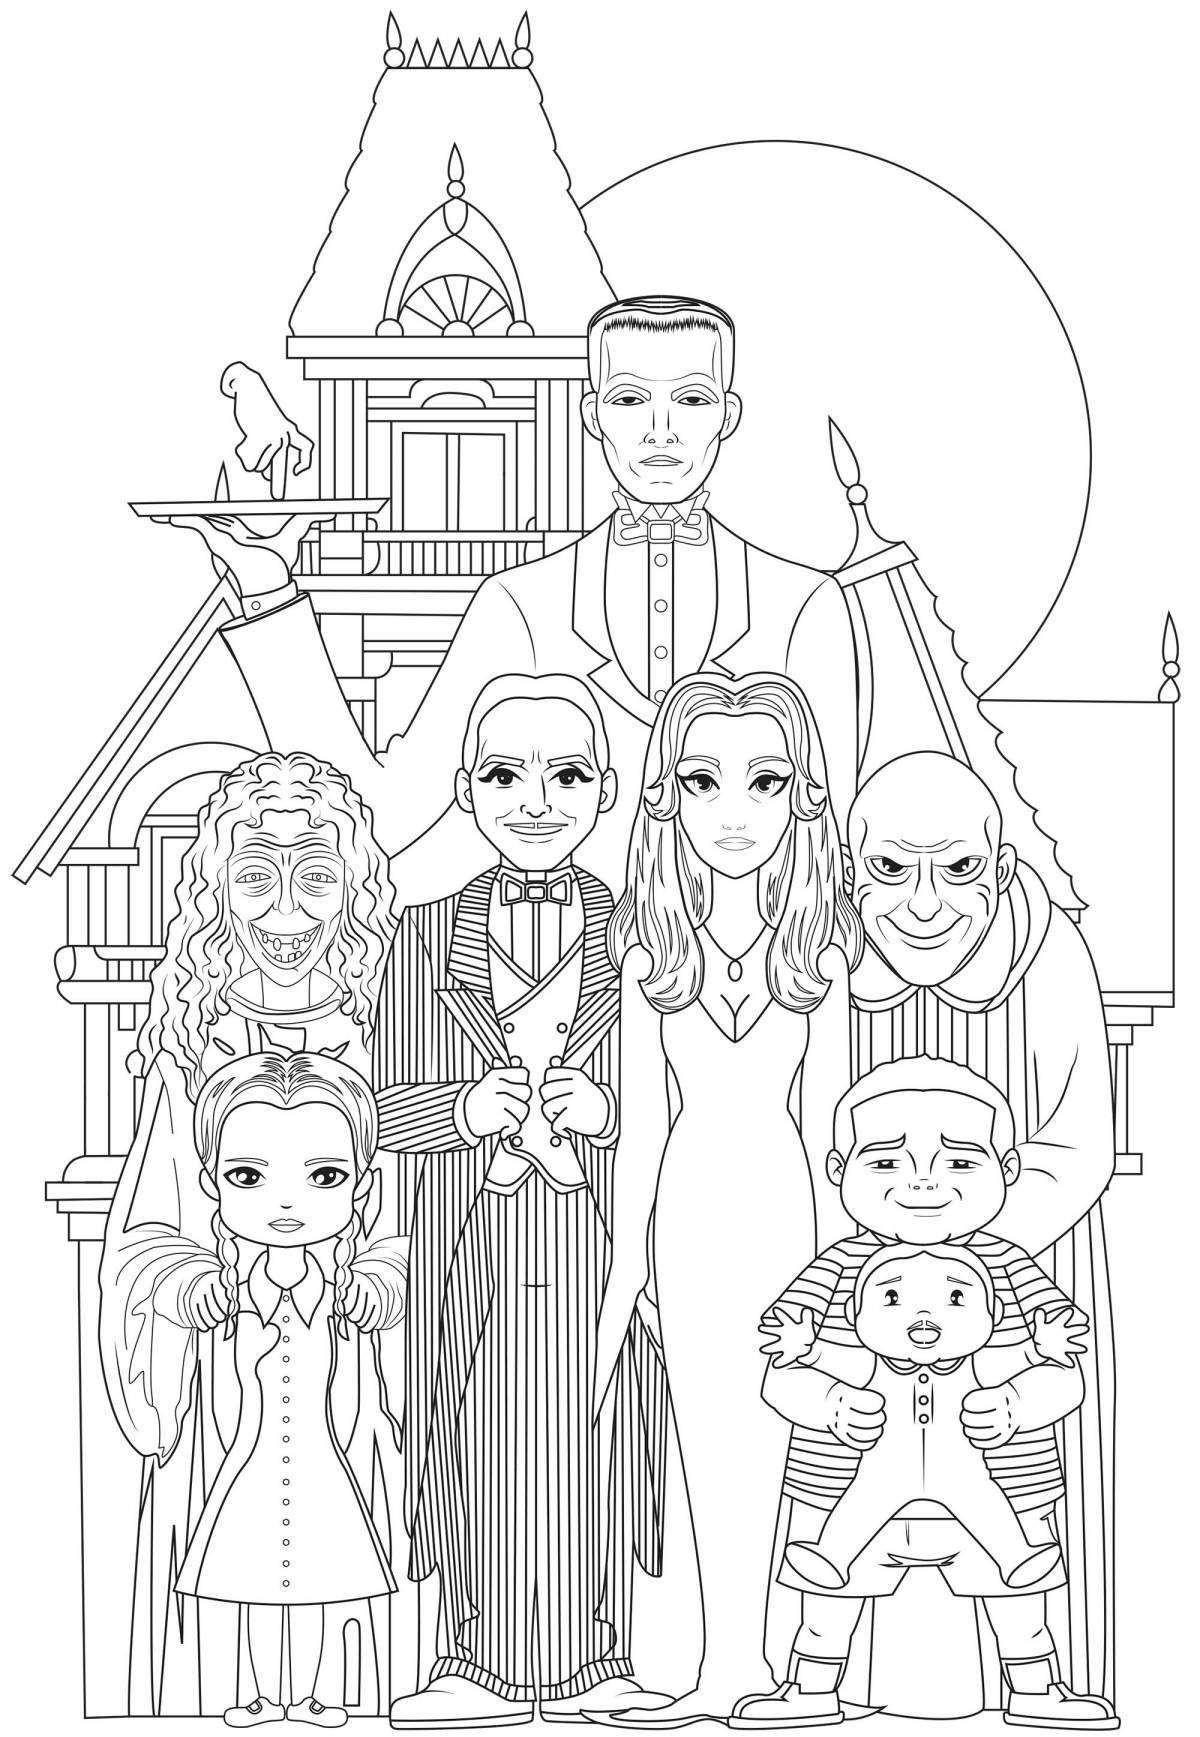 Delightful enit wednesday coloring page